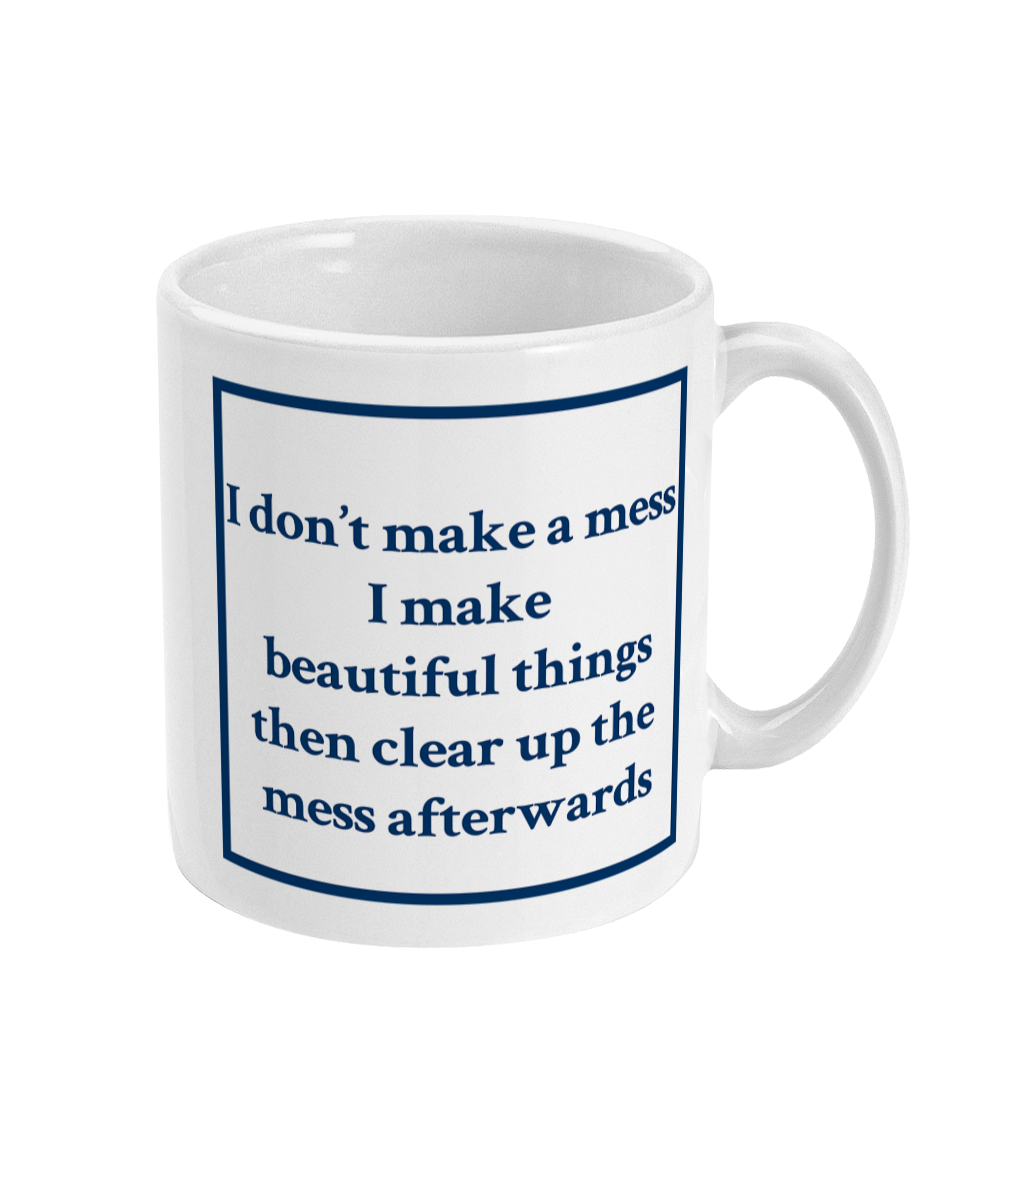 mug with I don't make mess I make beautiful things then clear up the mess afterwards printed on it